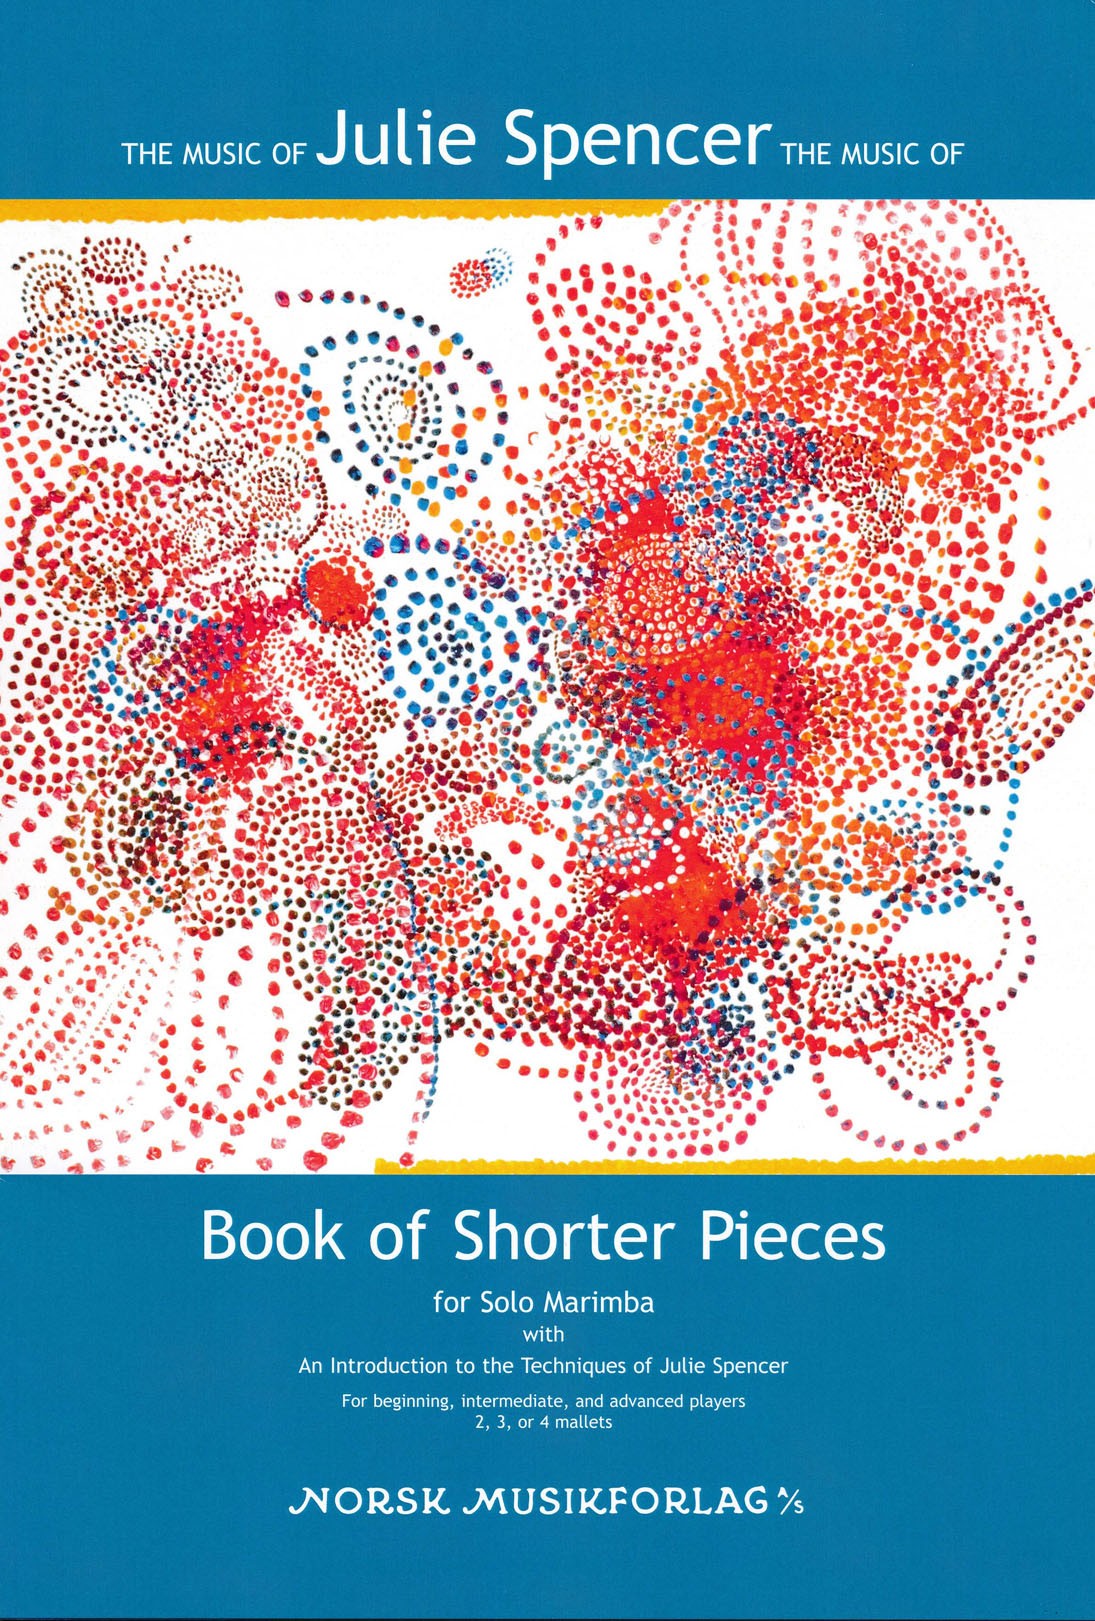 Book of Shorter Pieces by Julie Spencer